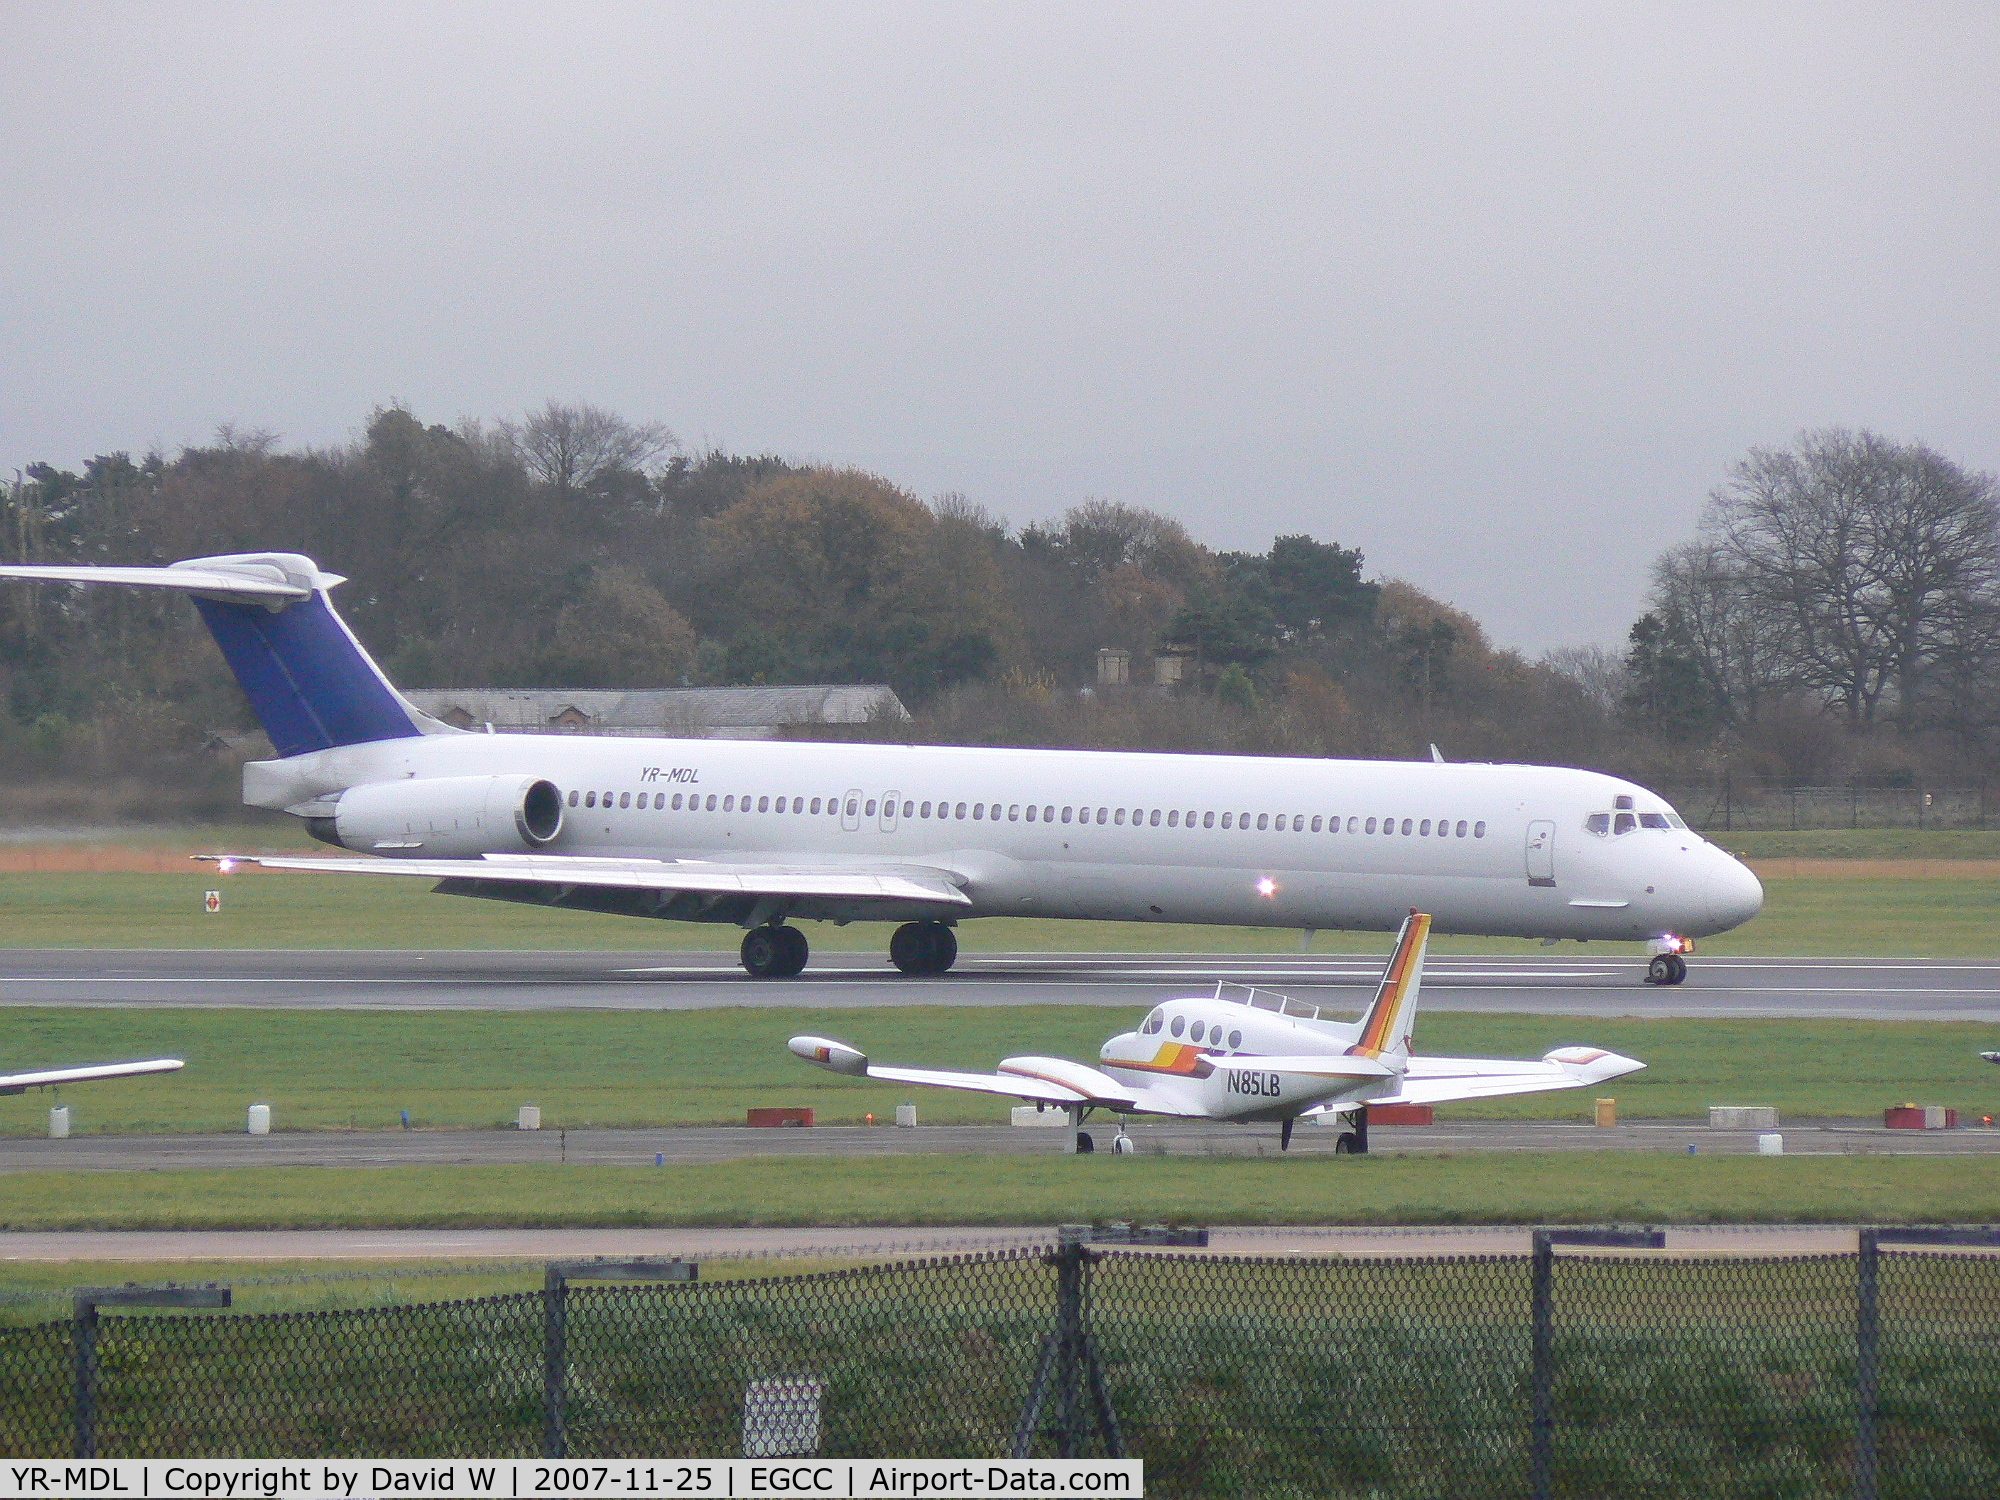 YR-MDL, 1981 McDonnell Douglas MD-82 (DC-9-82) C/N 48079, Just landed at Manchester.